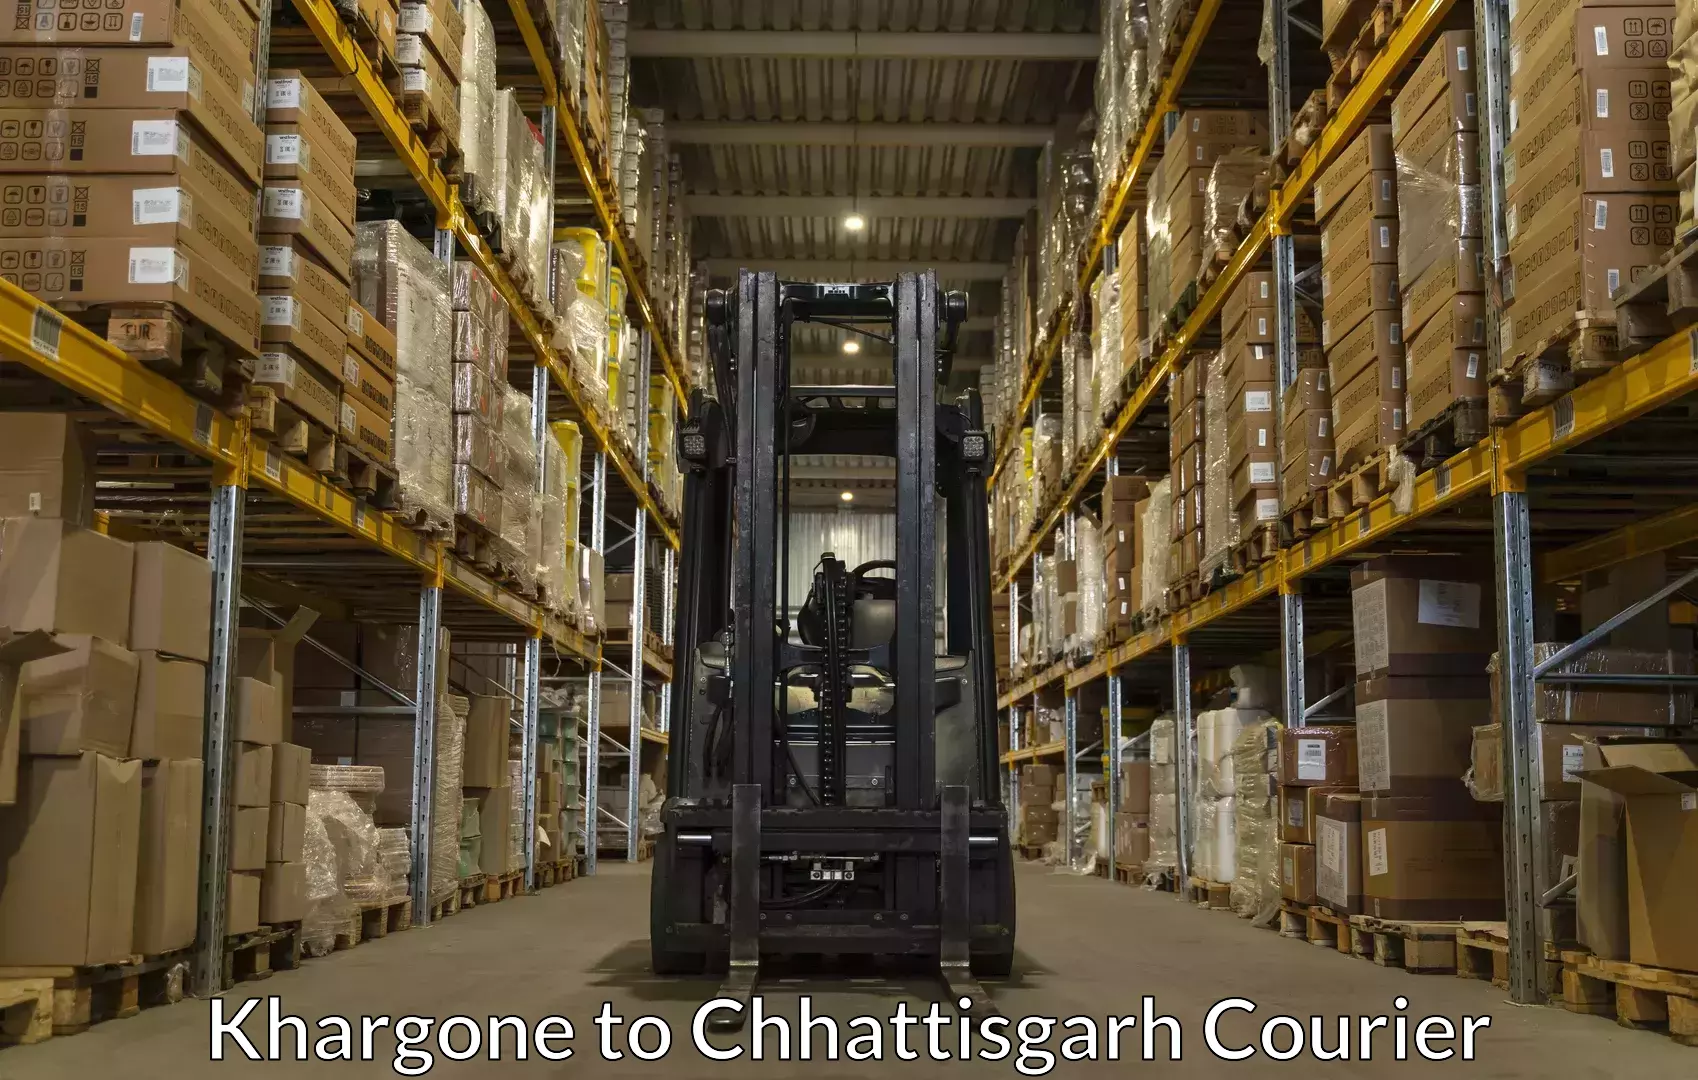 Baggage delivery technology Khargone to Ramanujganj